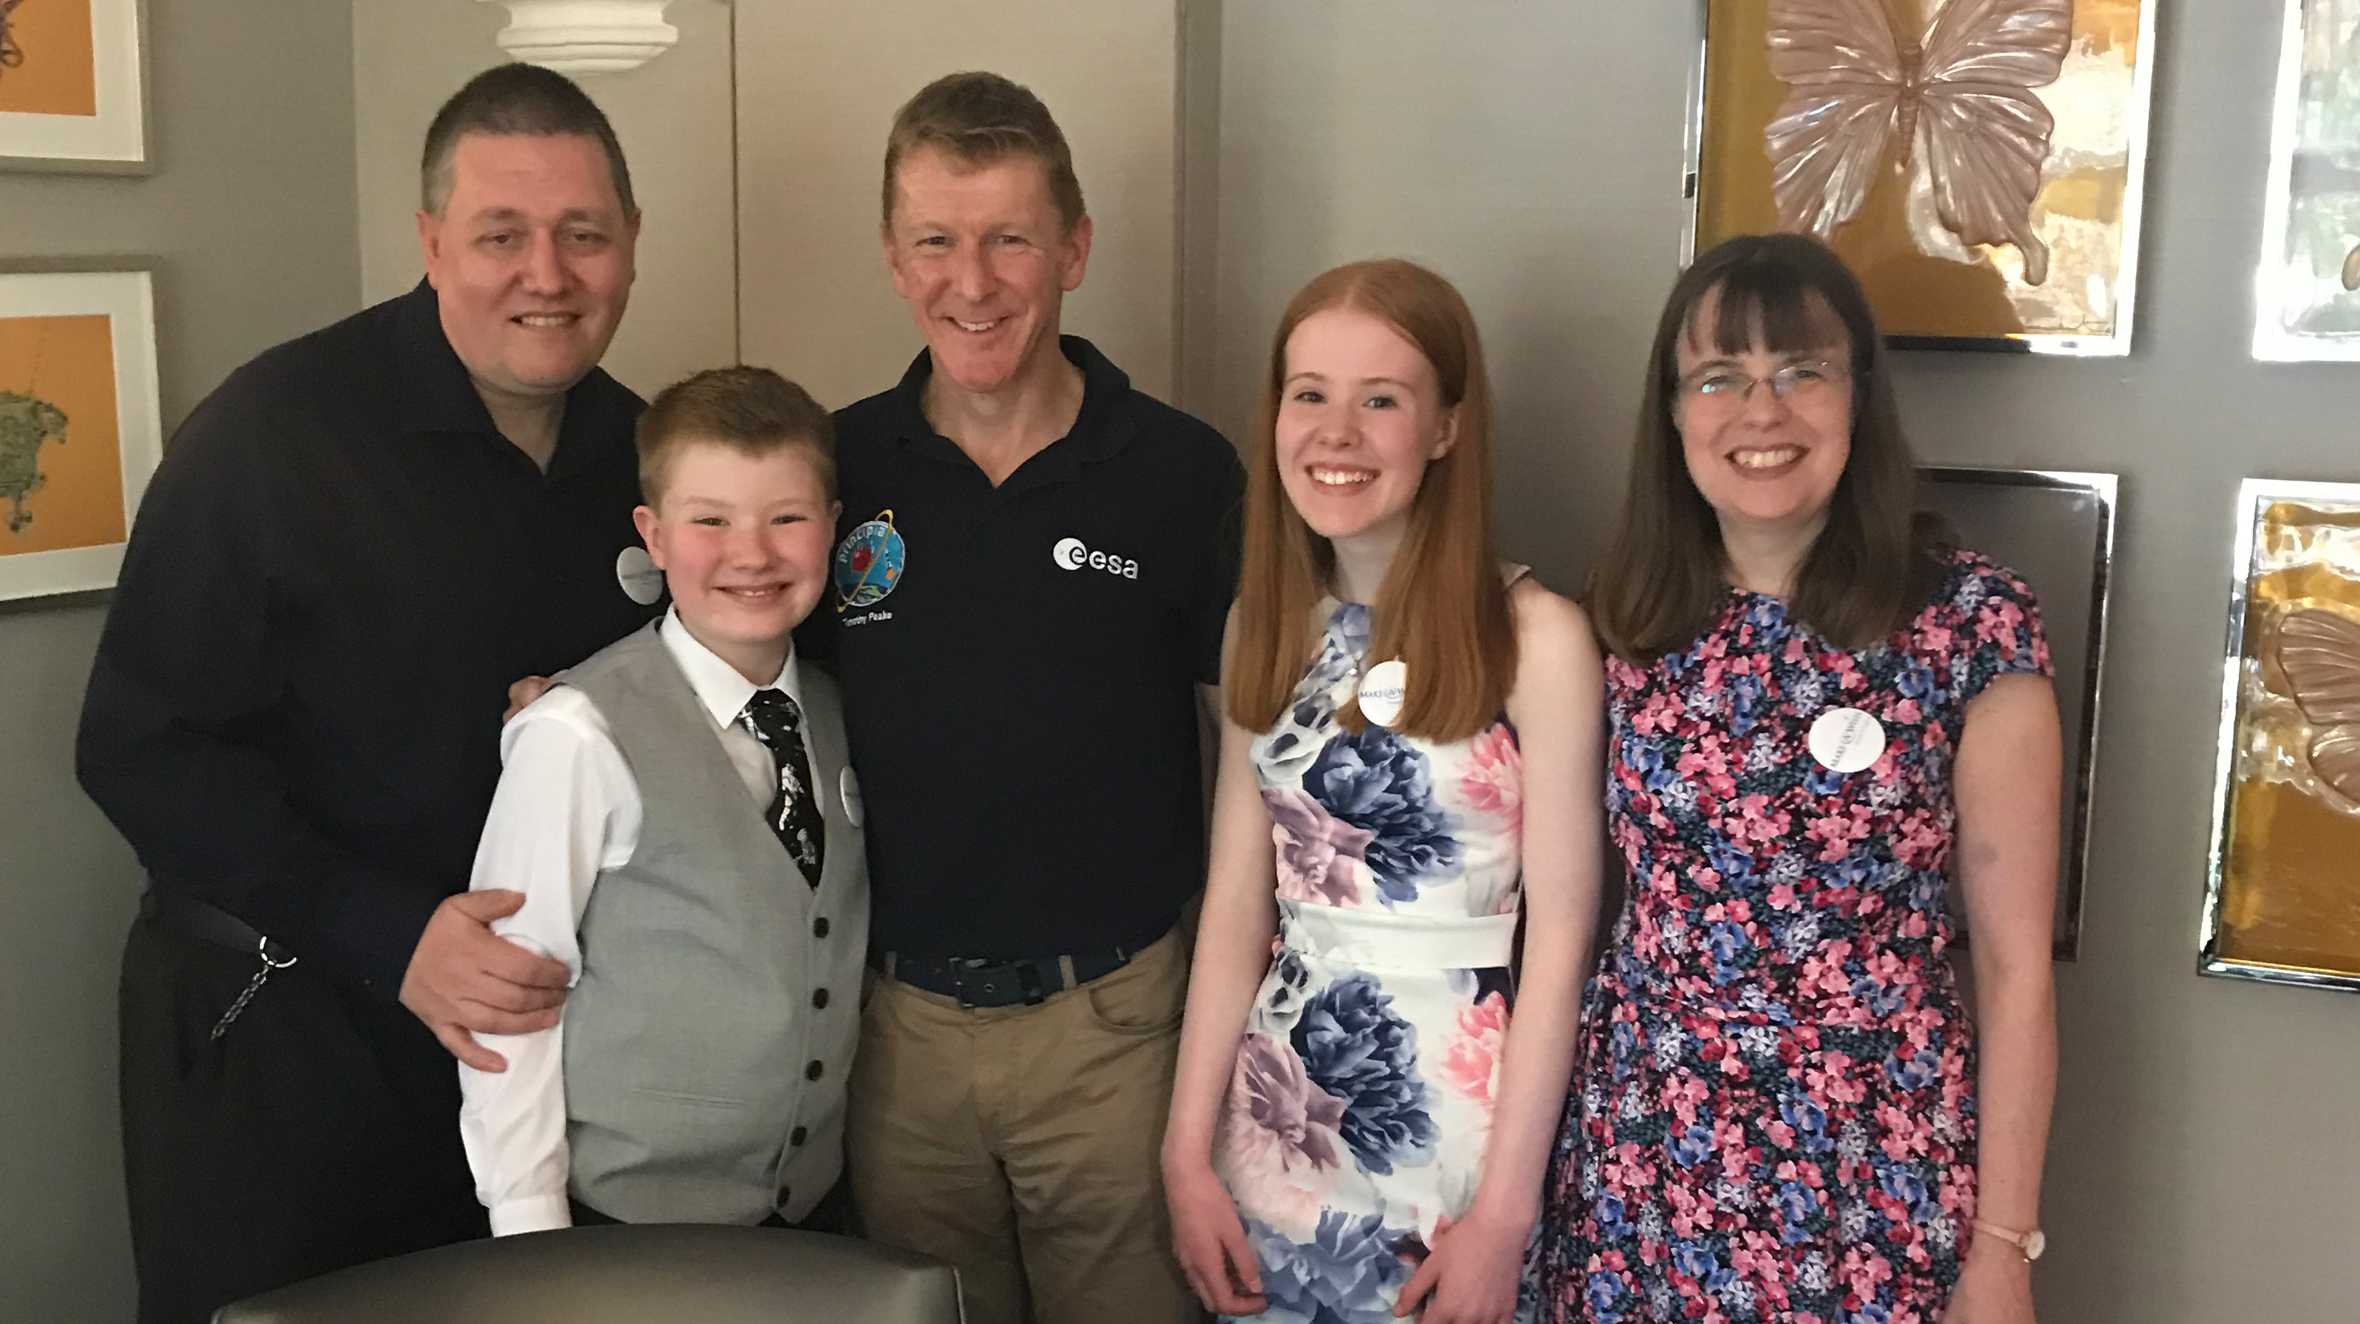 Joel and his family with Tim Peake